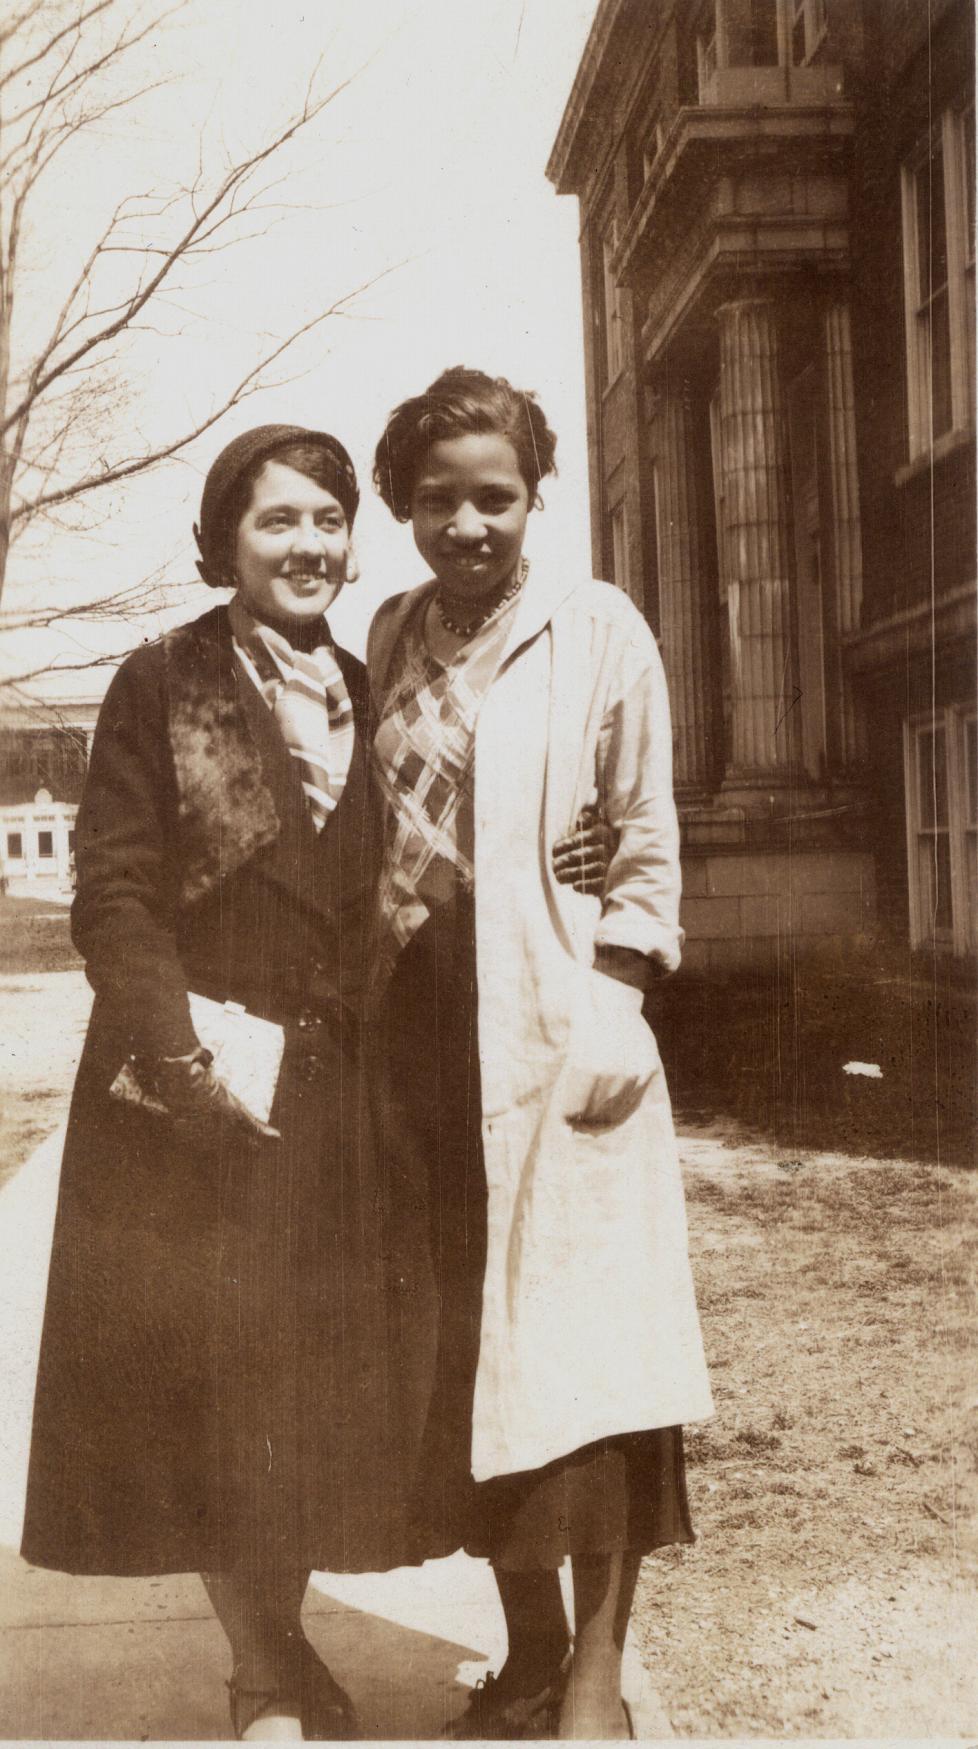 A sepia-toned photograph of two women standing with their arms around each other. They are both wearing long coats and dark skirts.